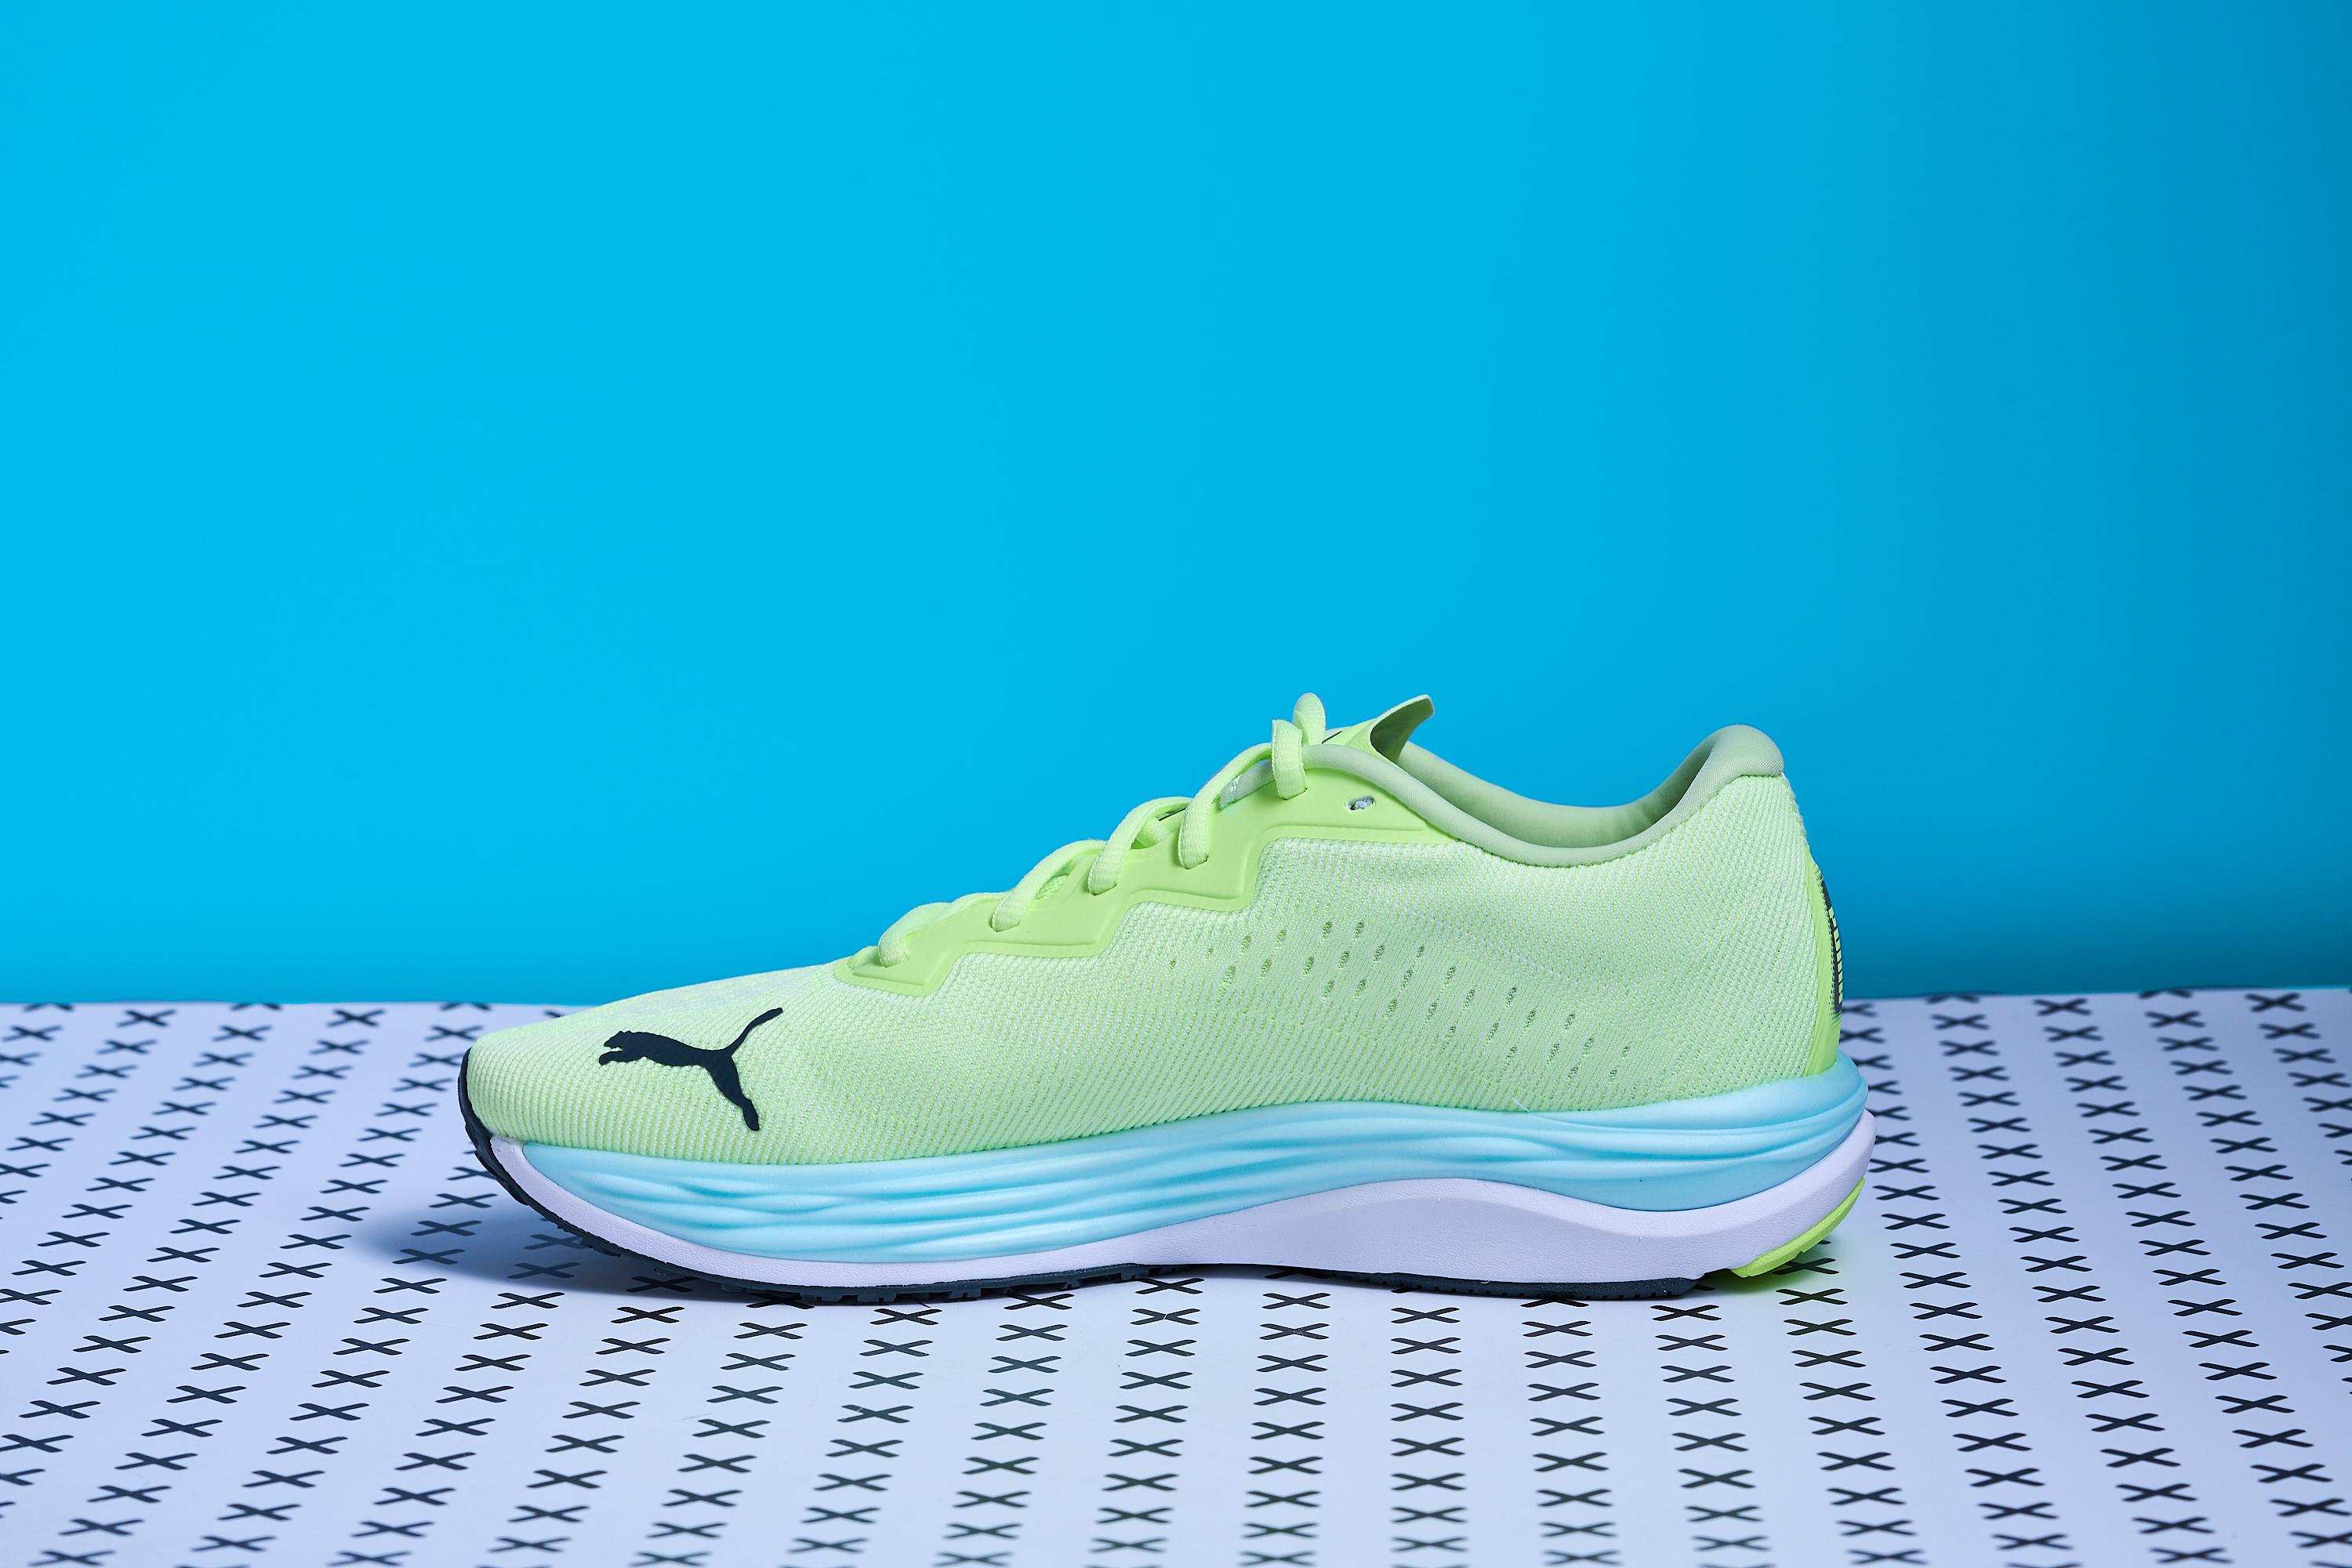 Test: Puma Velocity Nitro 2 - See the review and buy the shoe here